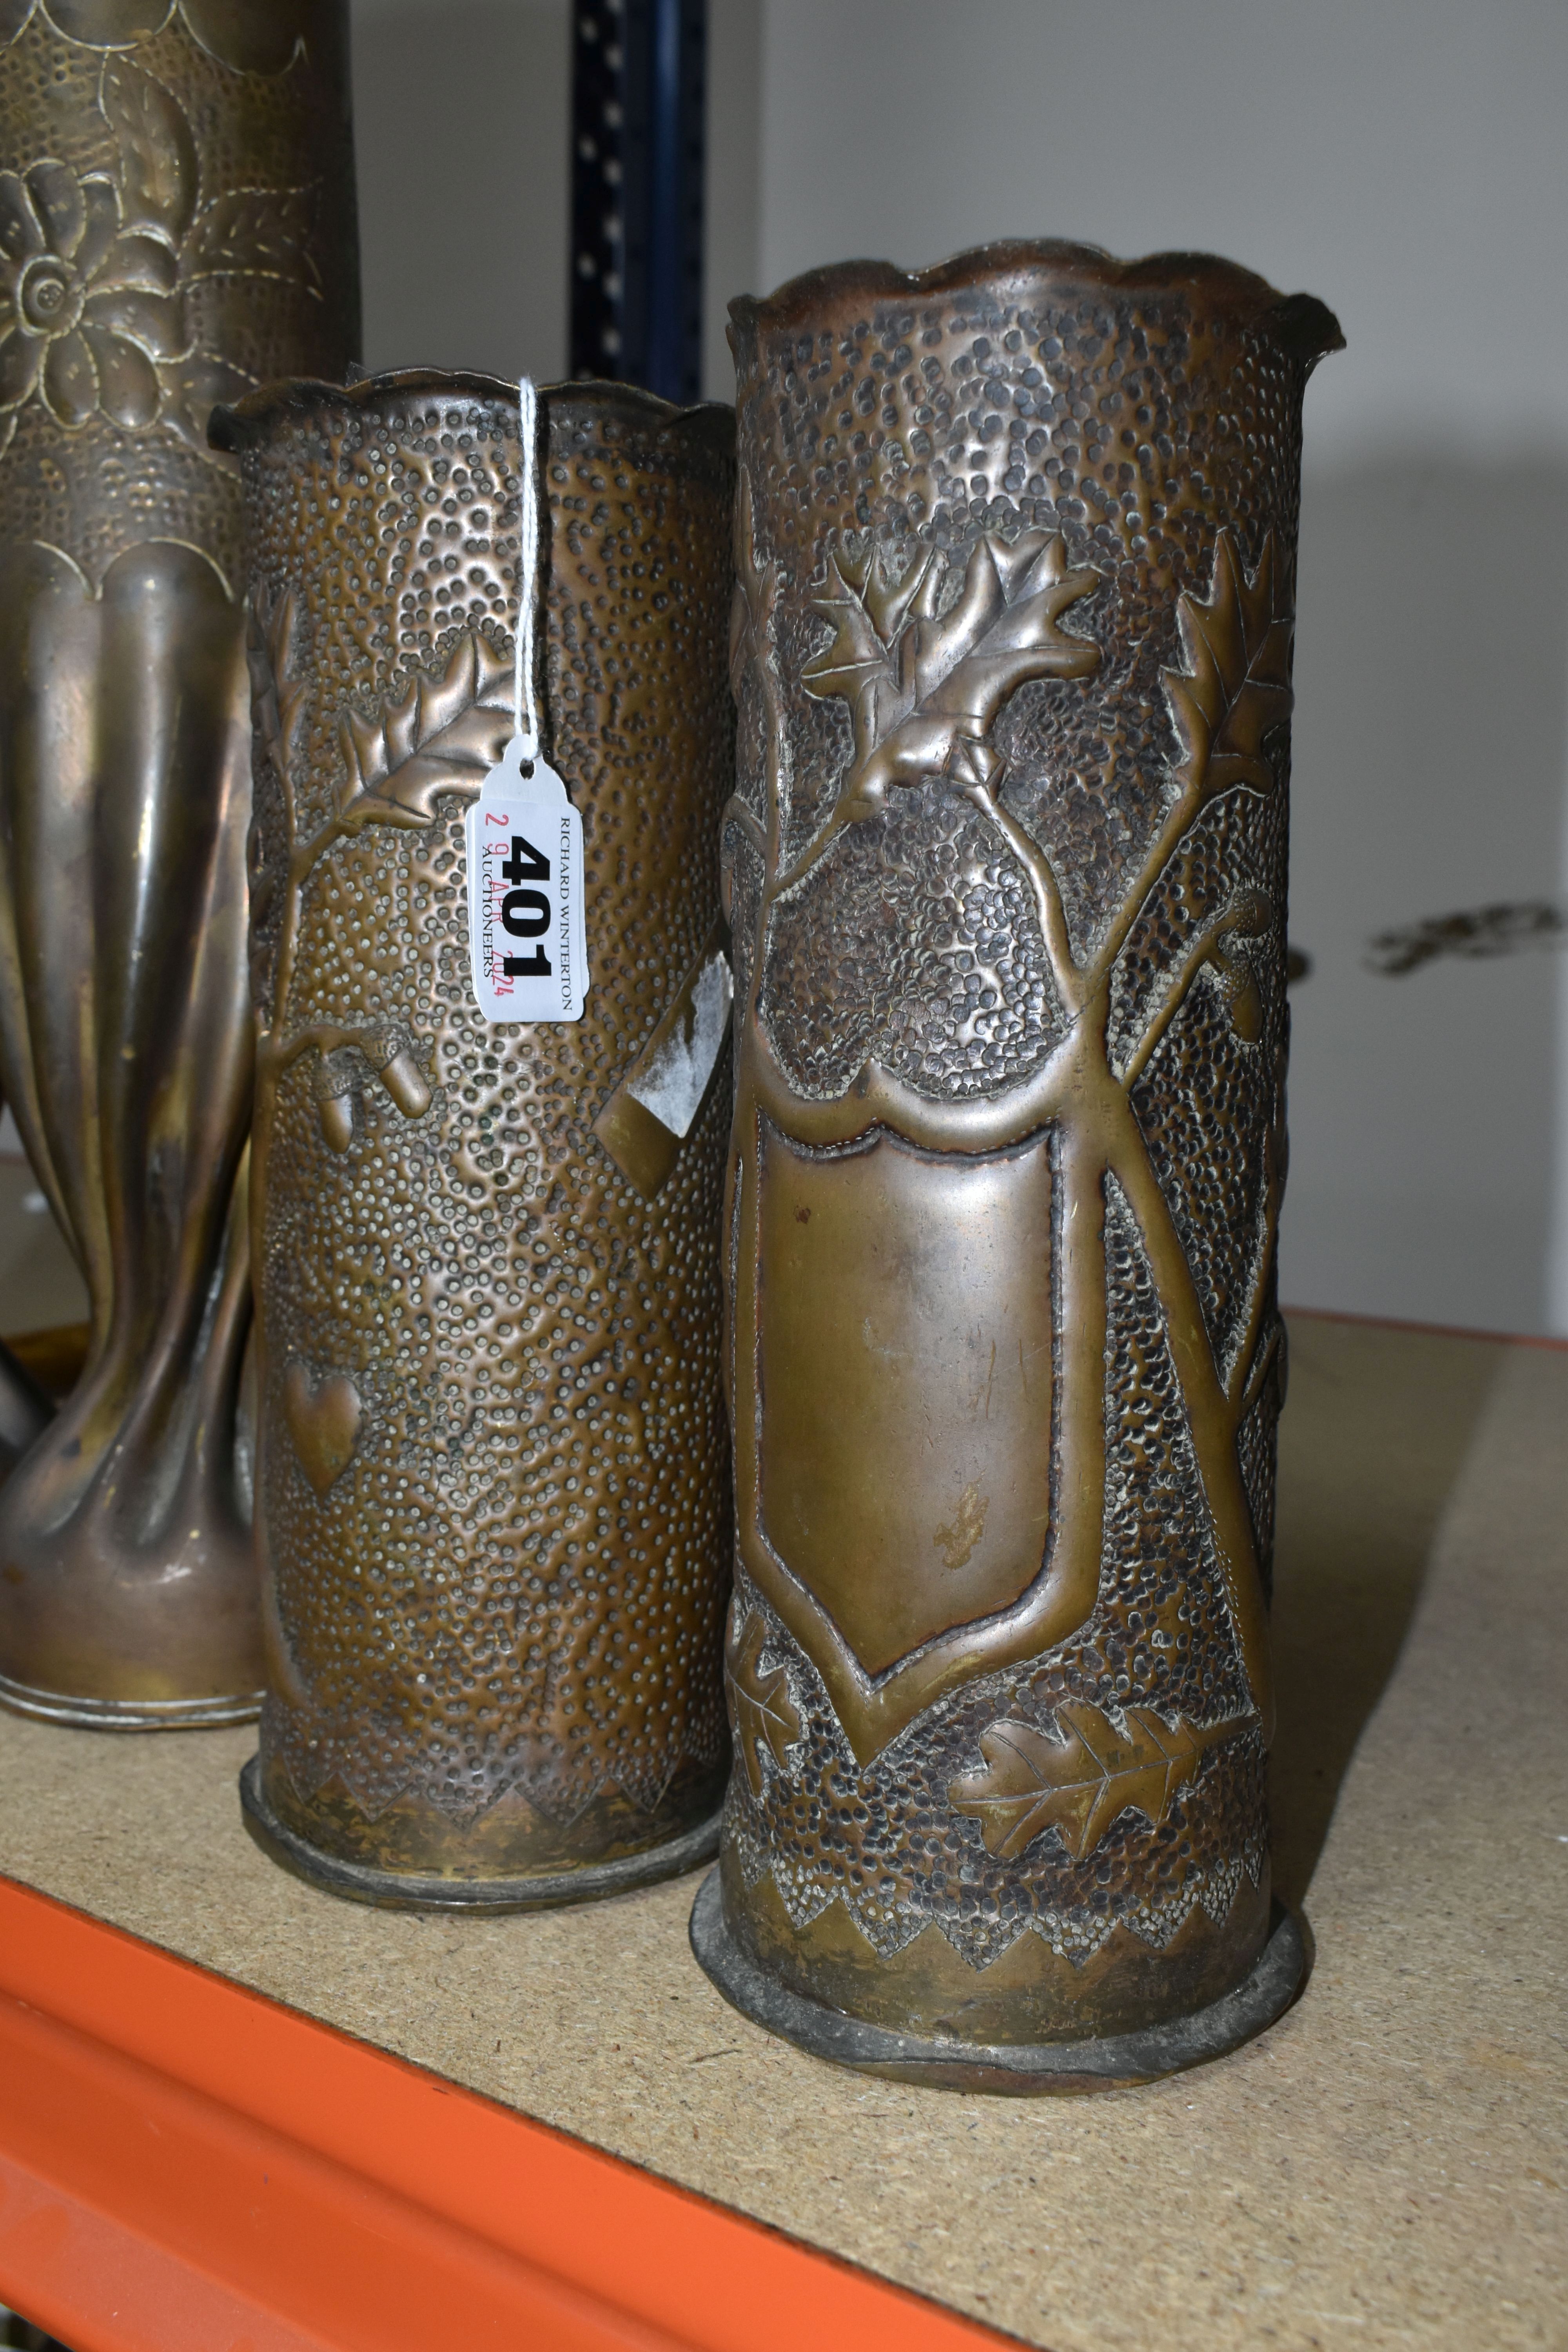 TWO PAIRS OF TRENCH ART VASES, one pair have been twisted at the base and decorated with a rose - Image 3 of 3